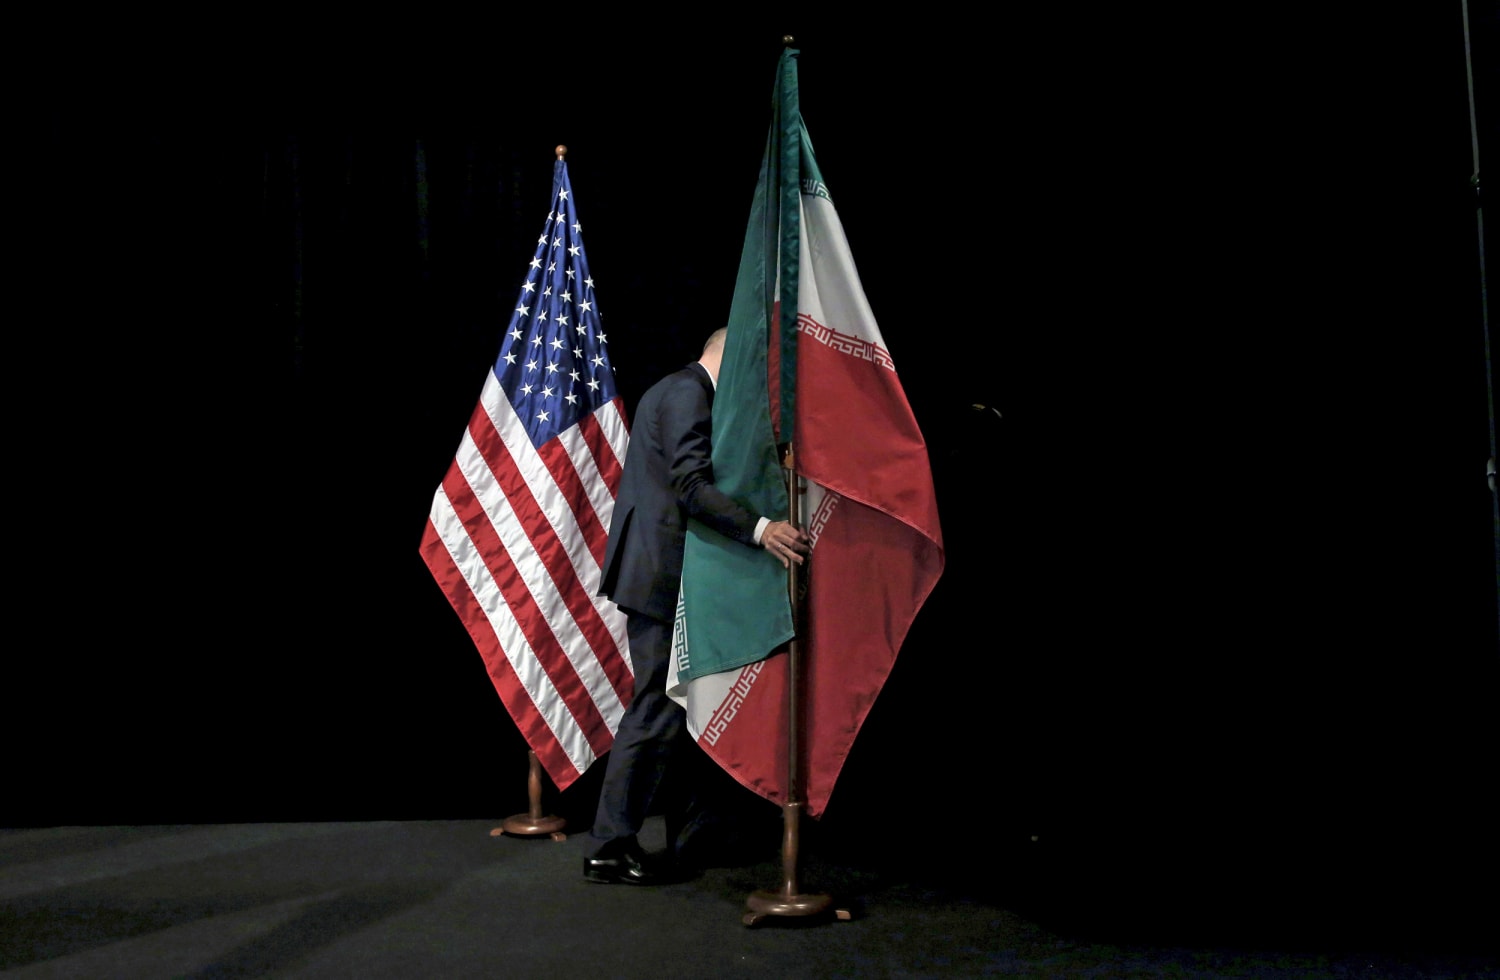 U.S. weighs grim options if nuclear talks with Iran collapse